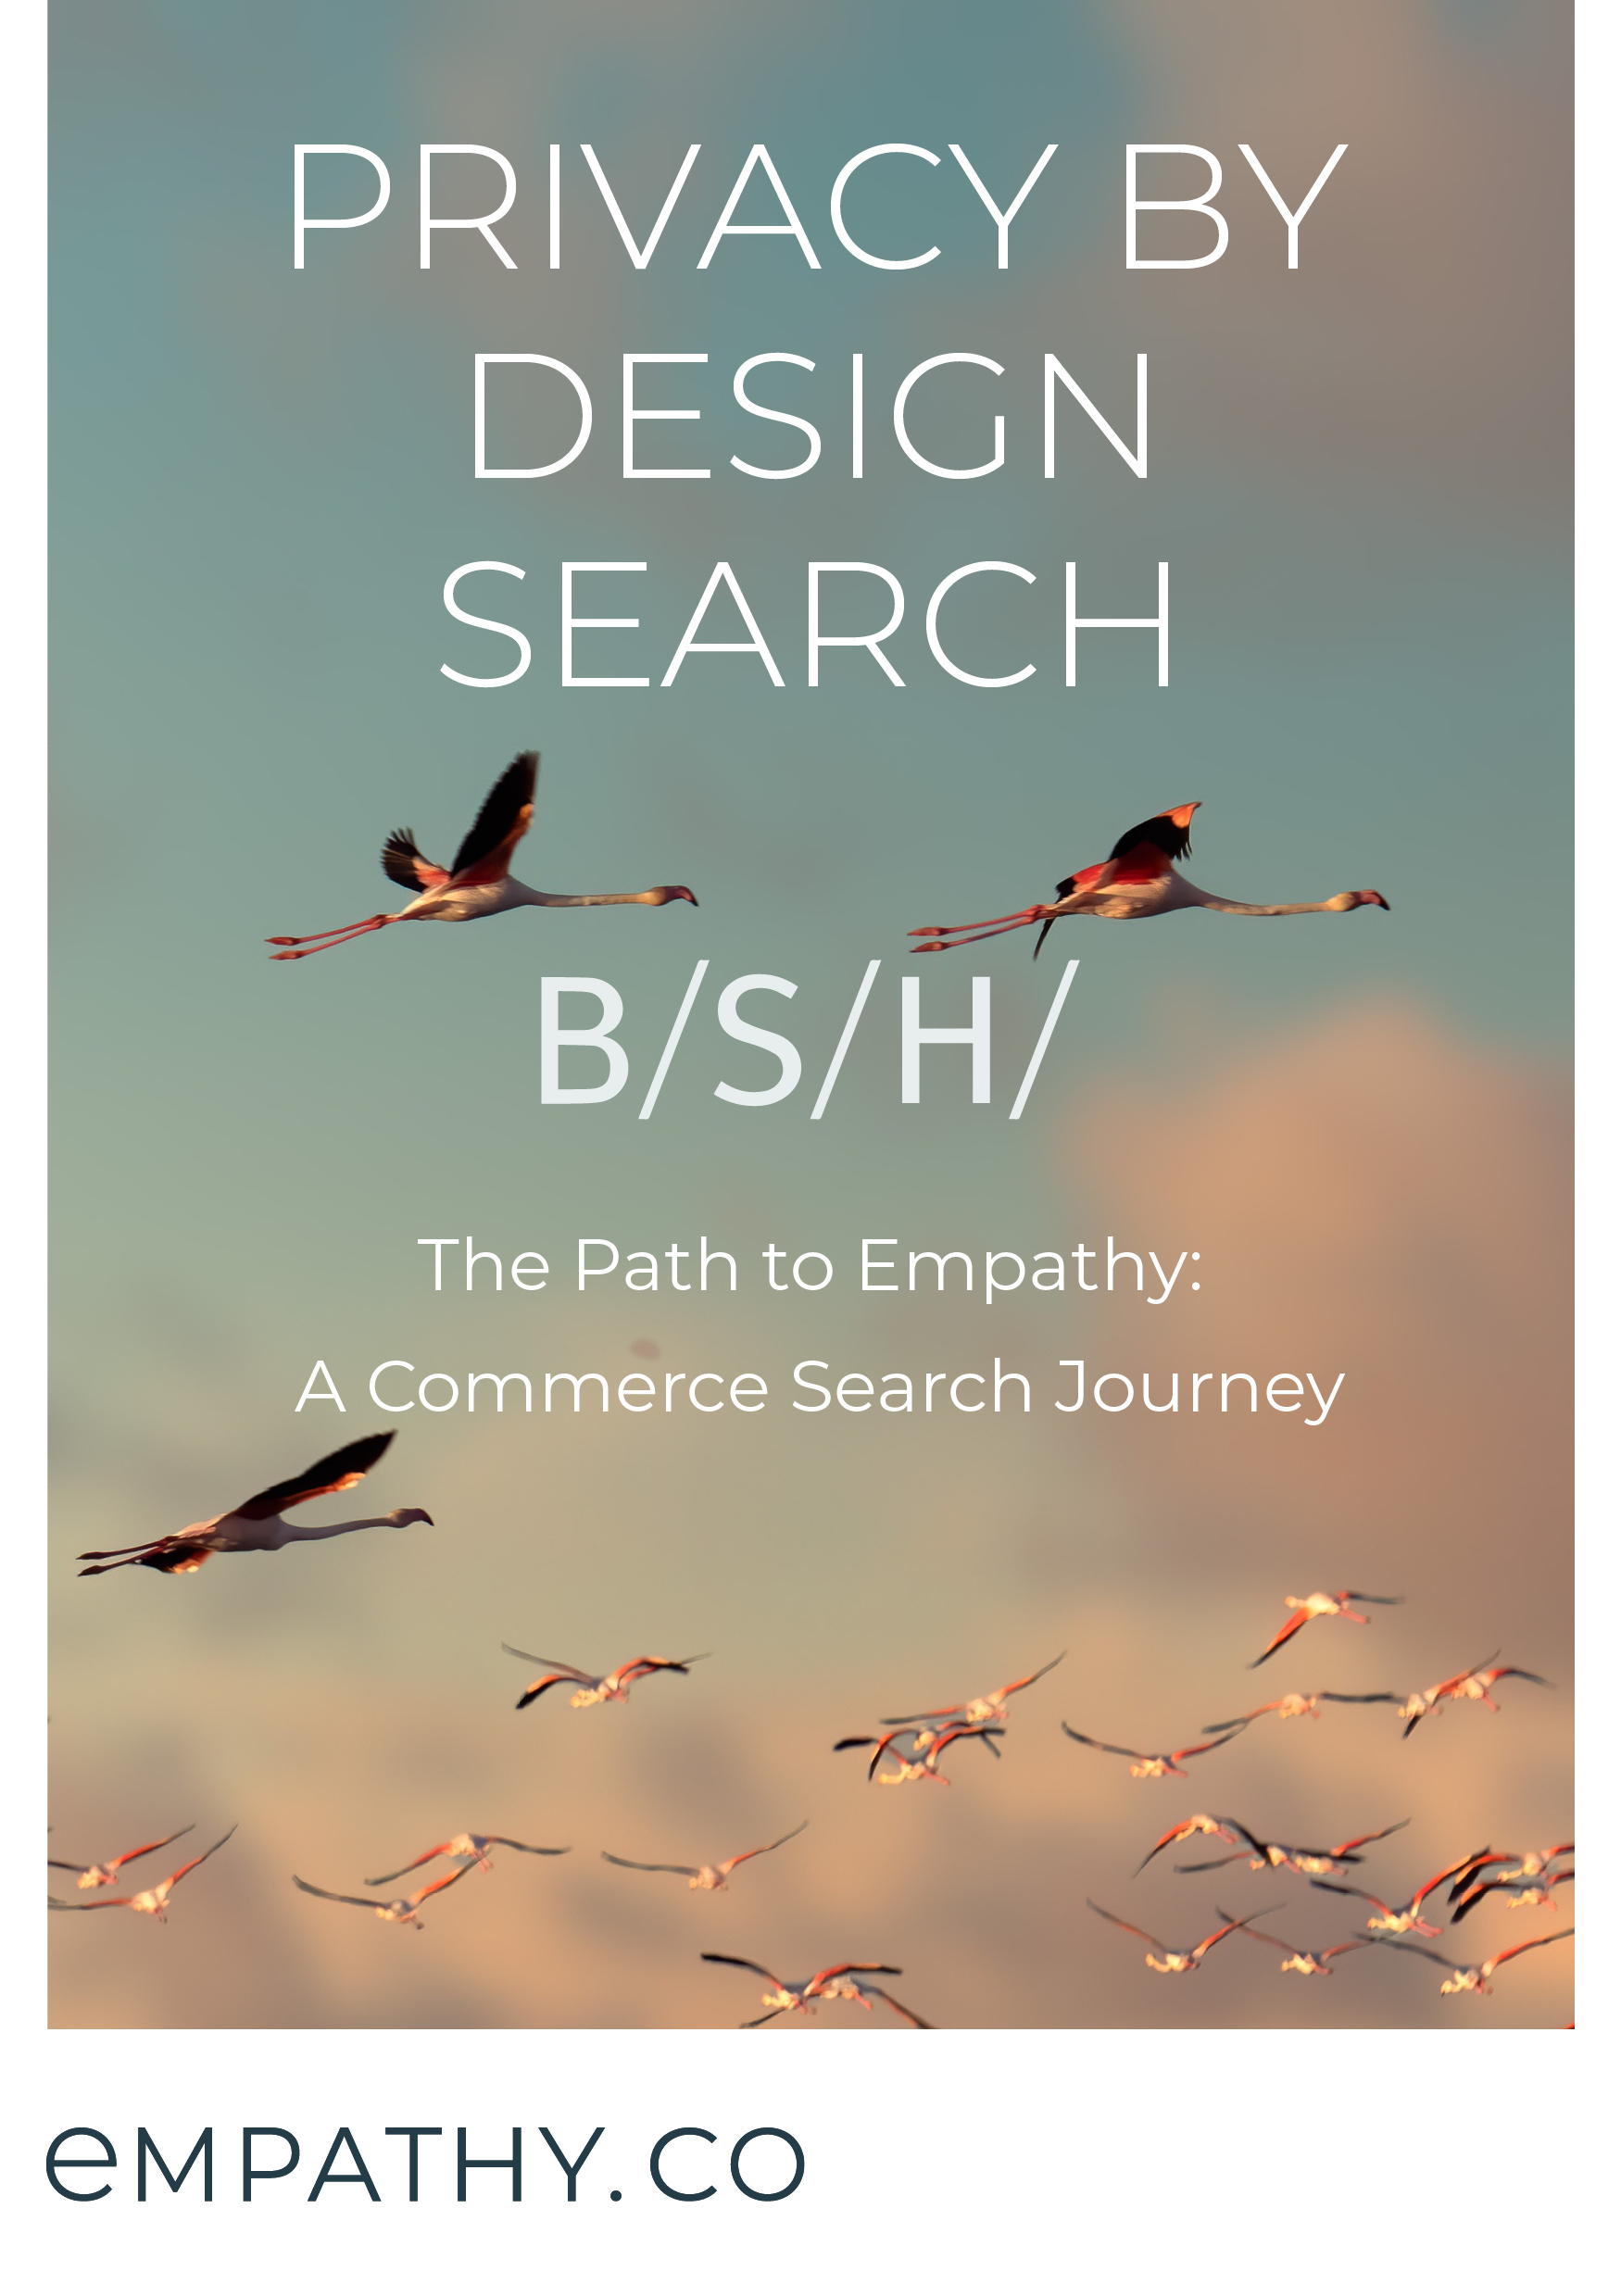 BSH: Privacy by Design Search the path to Empathy